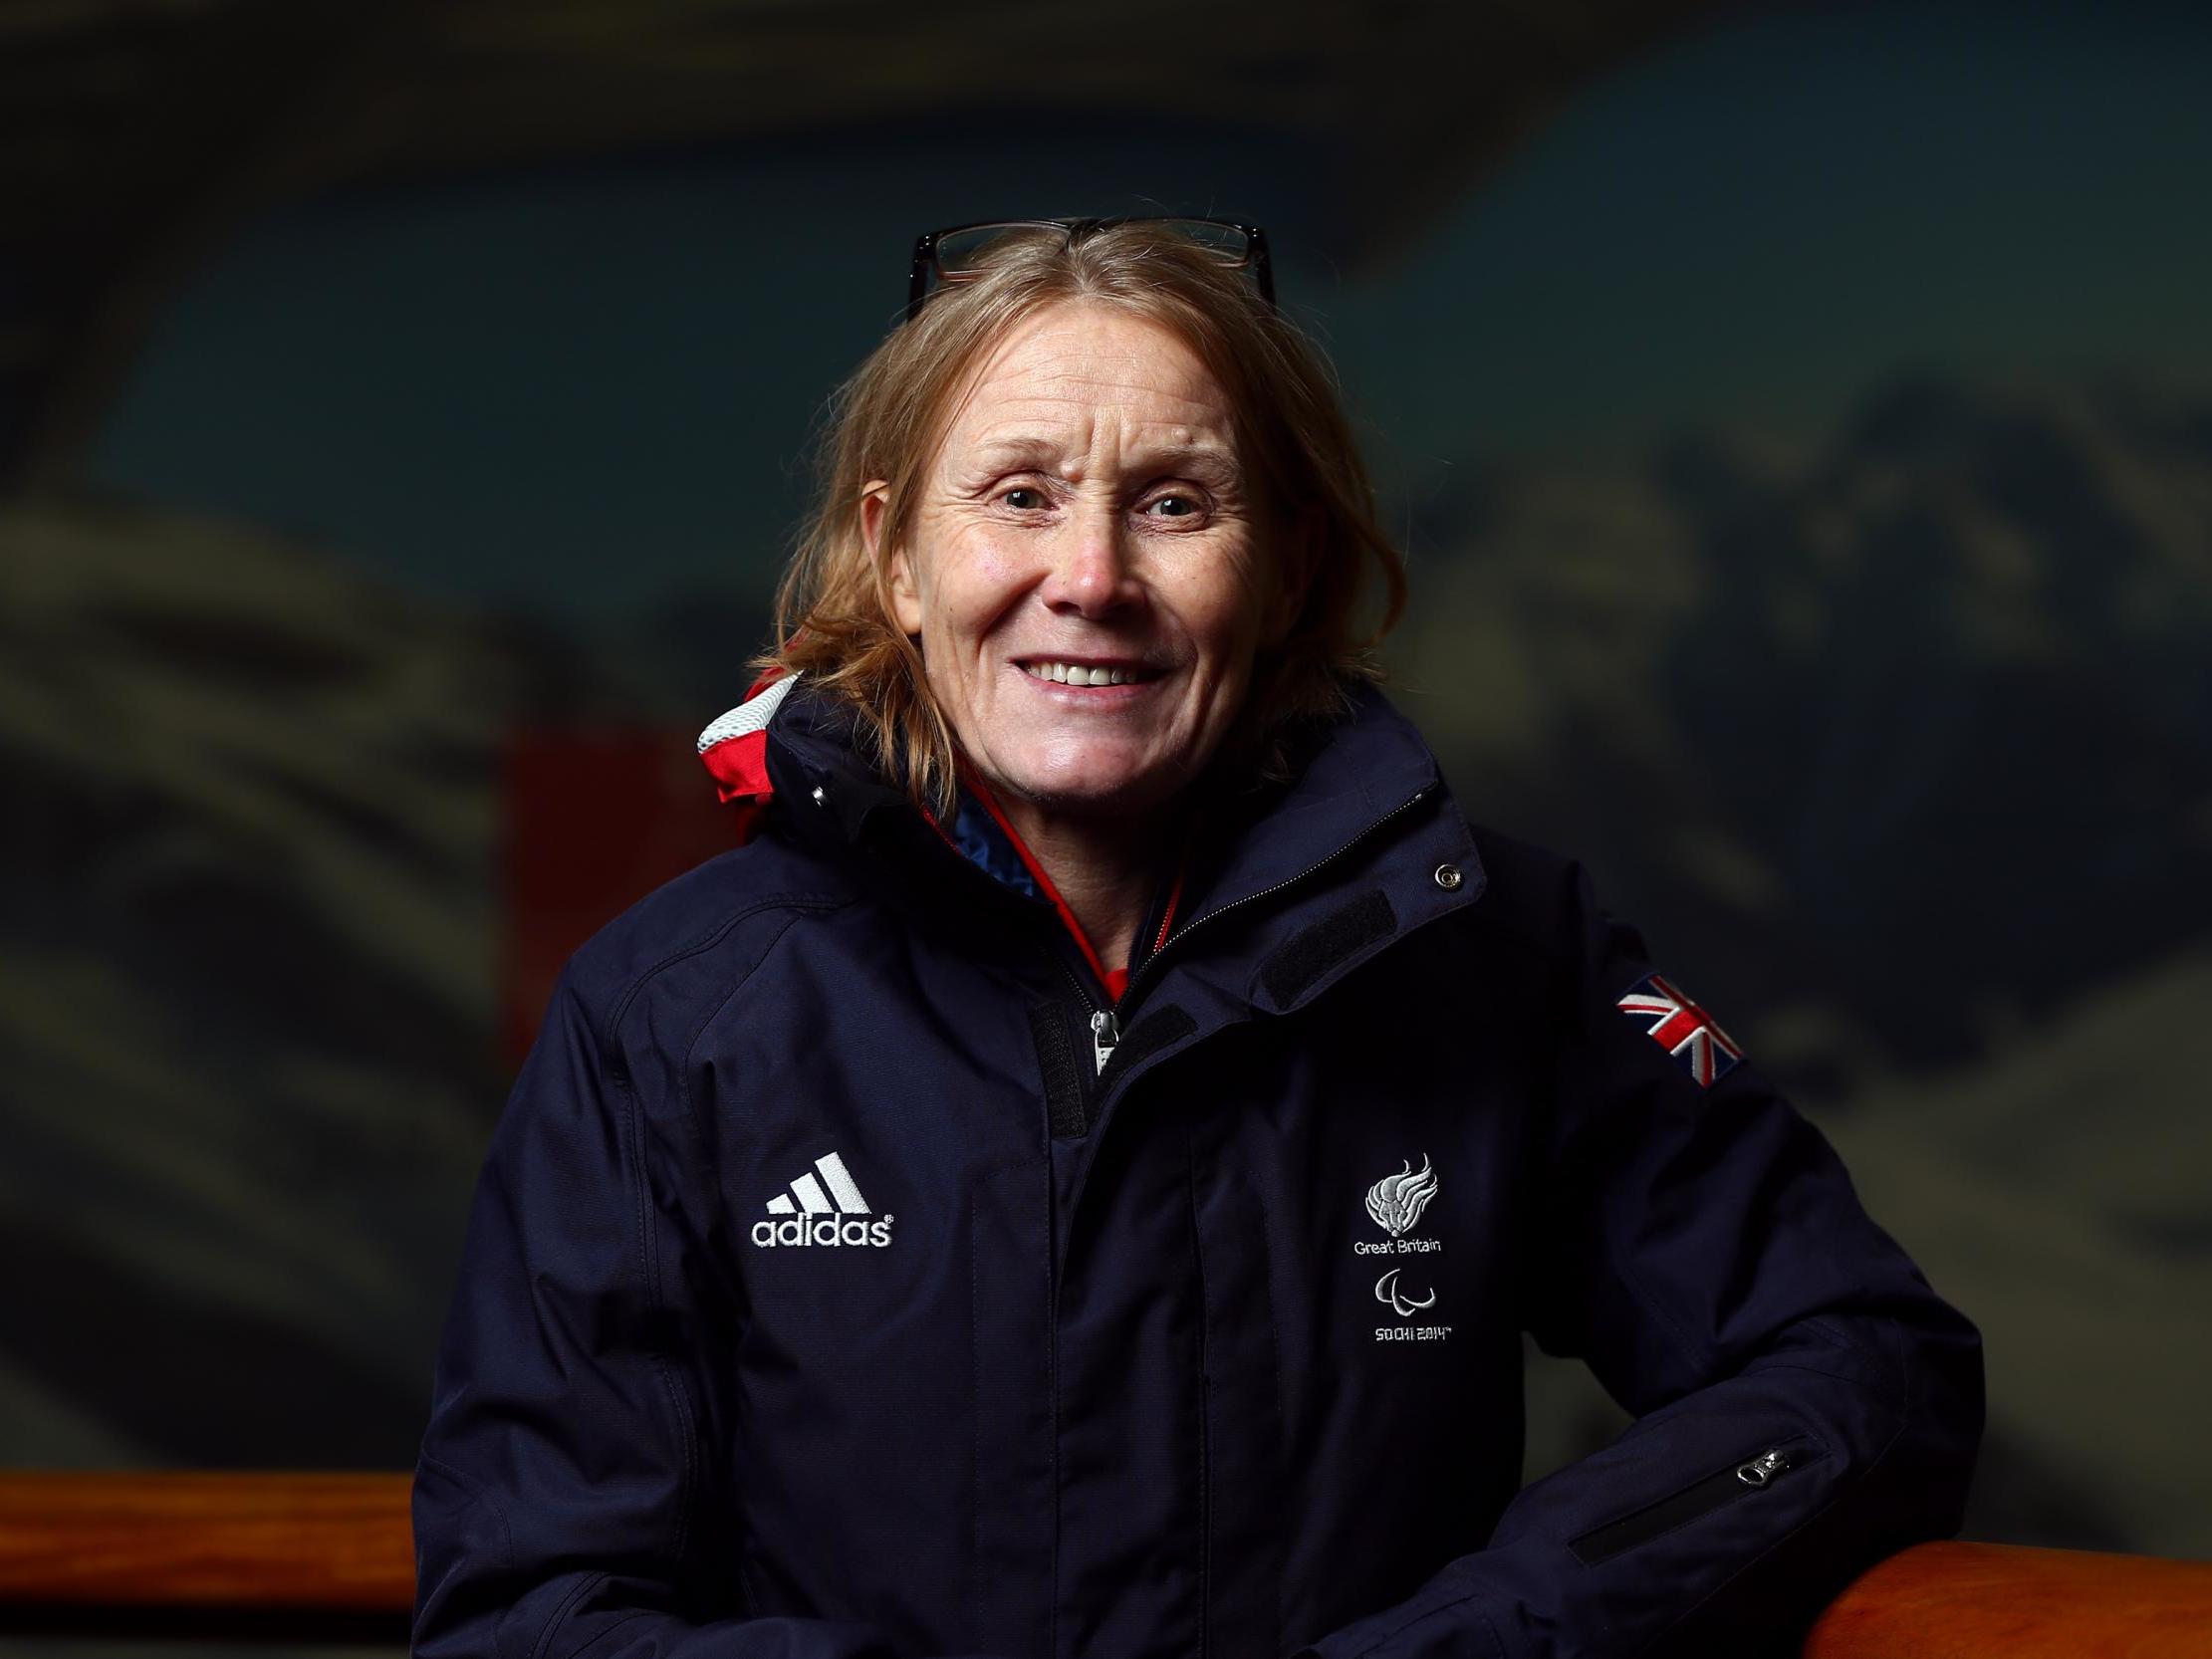 British Paralympics chief Penny Briscoe believes cost-cutting won't impact athletes